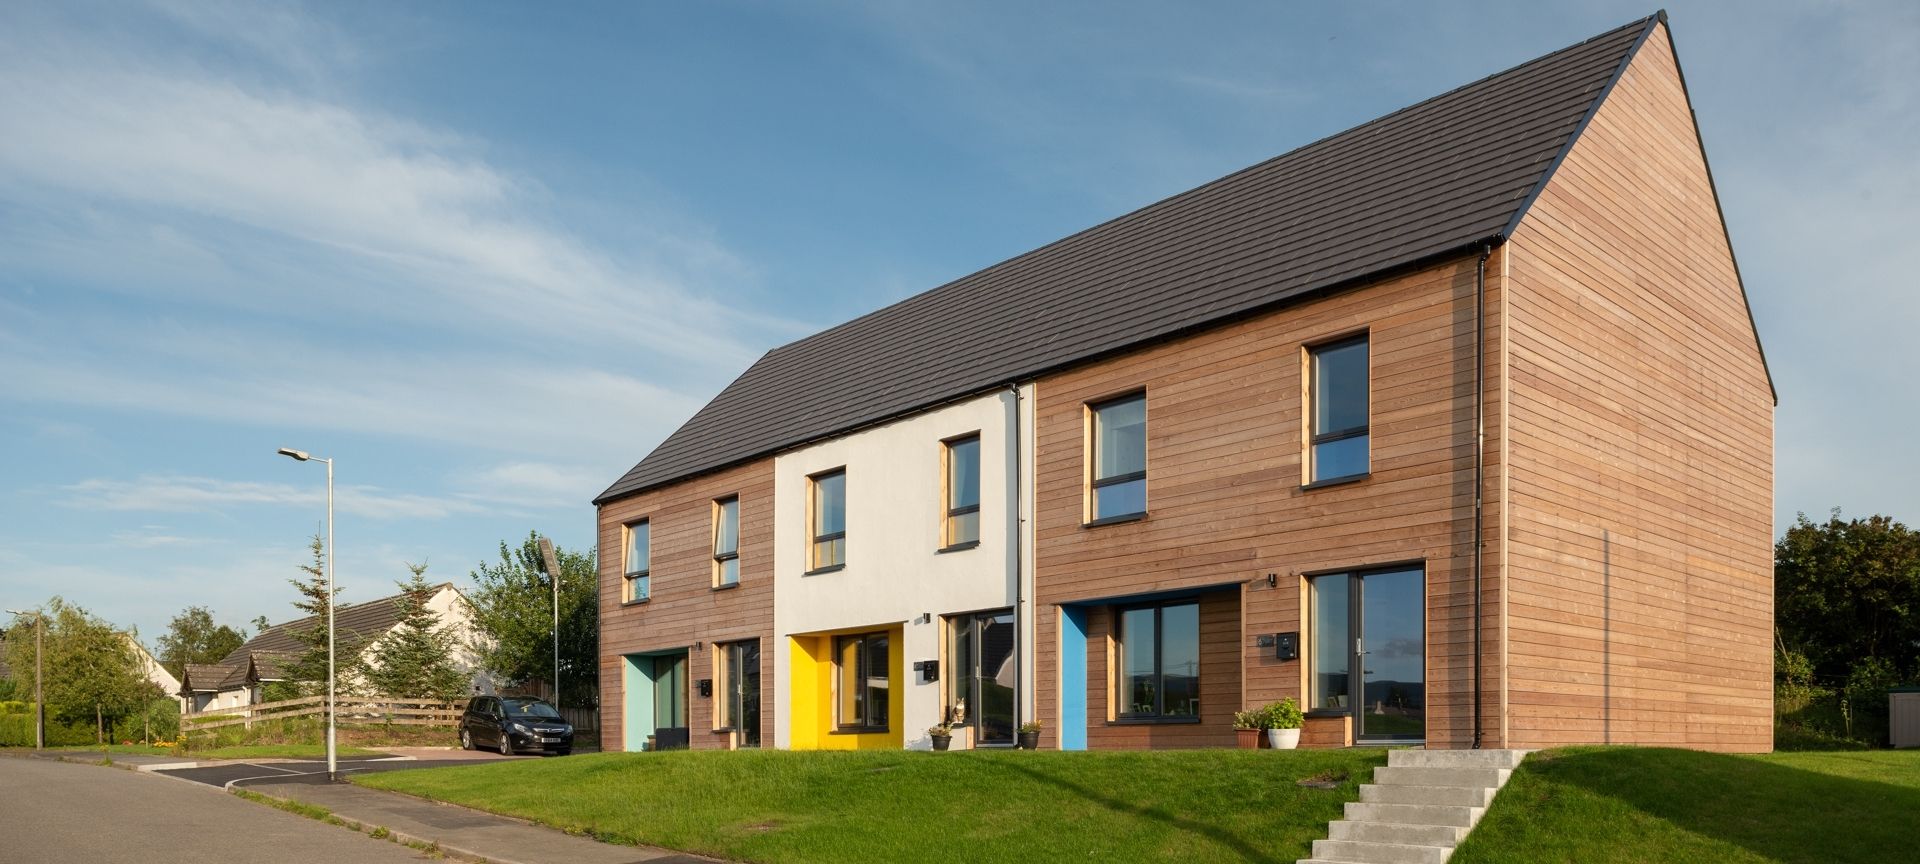 Artist impression of three new build terraced houses